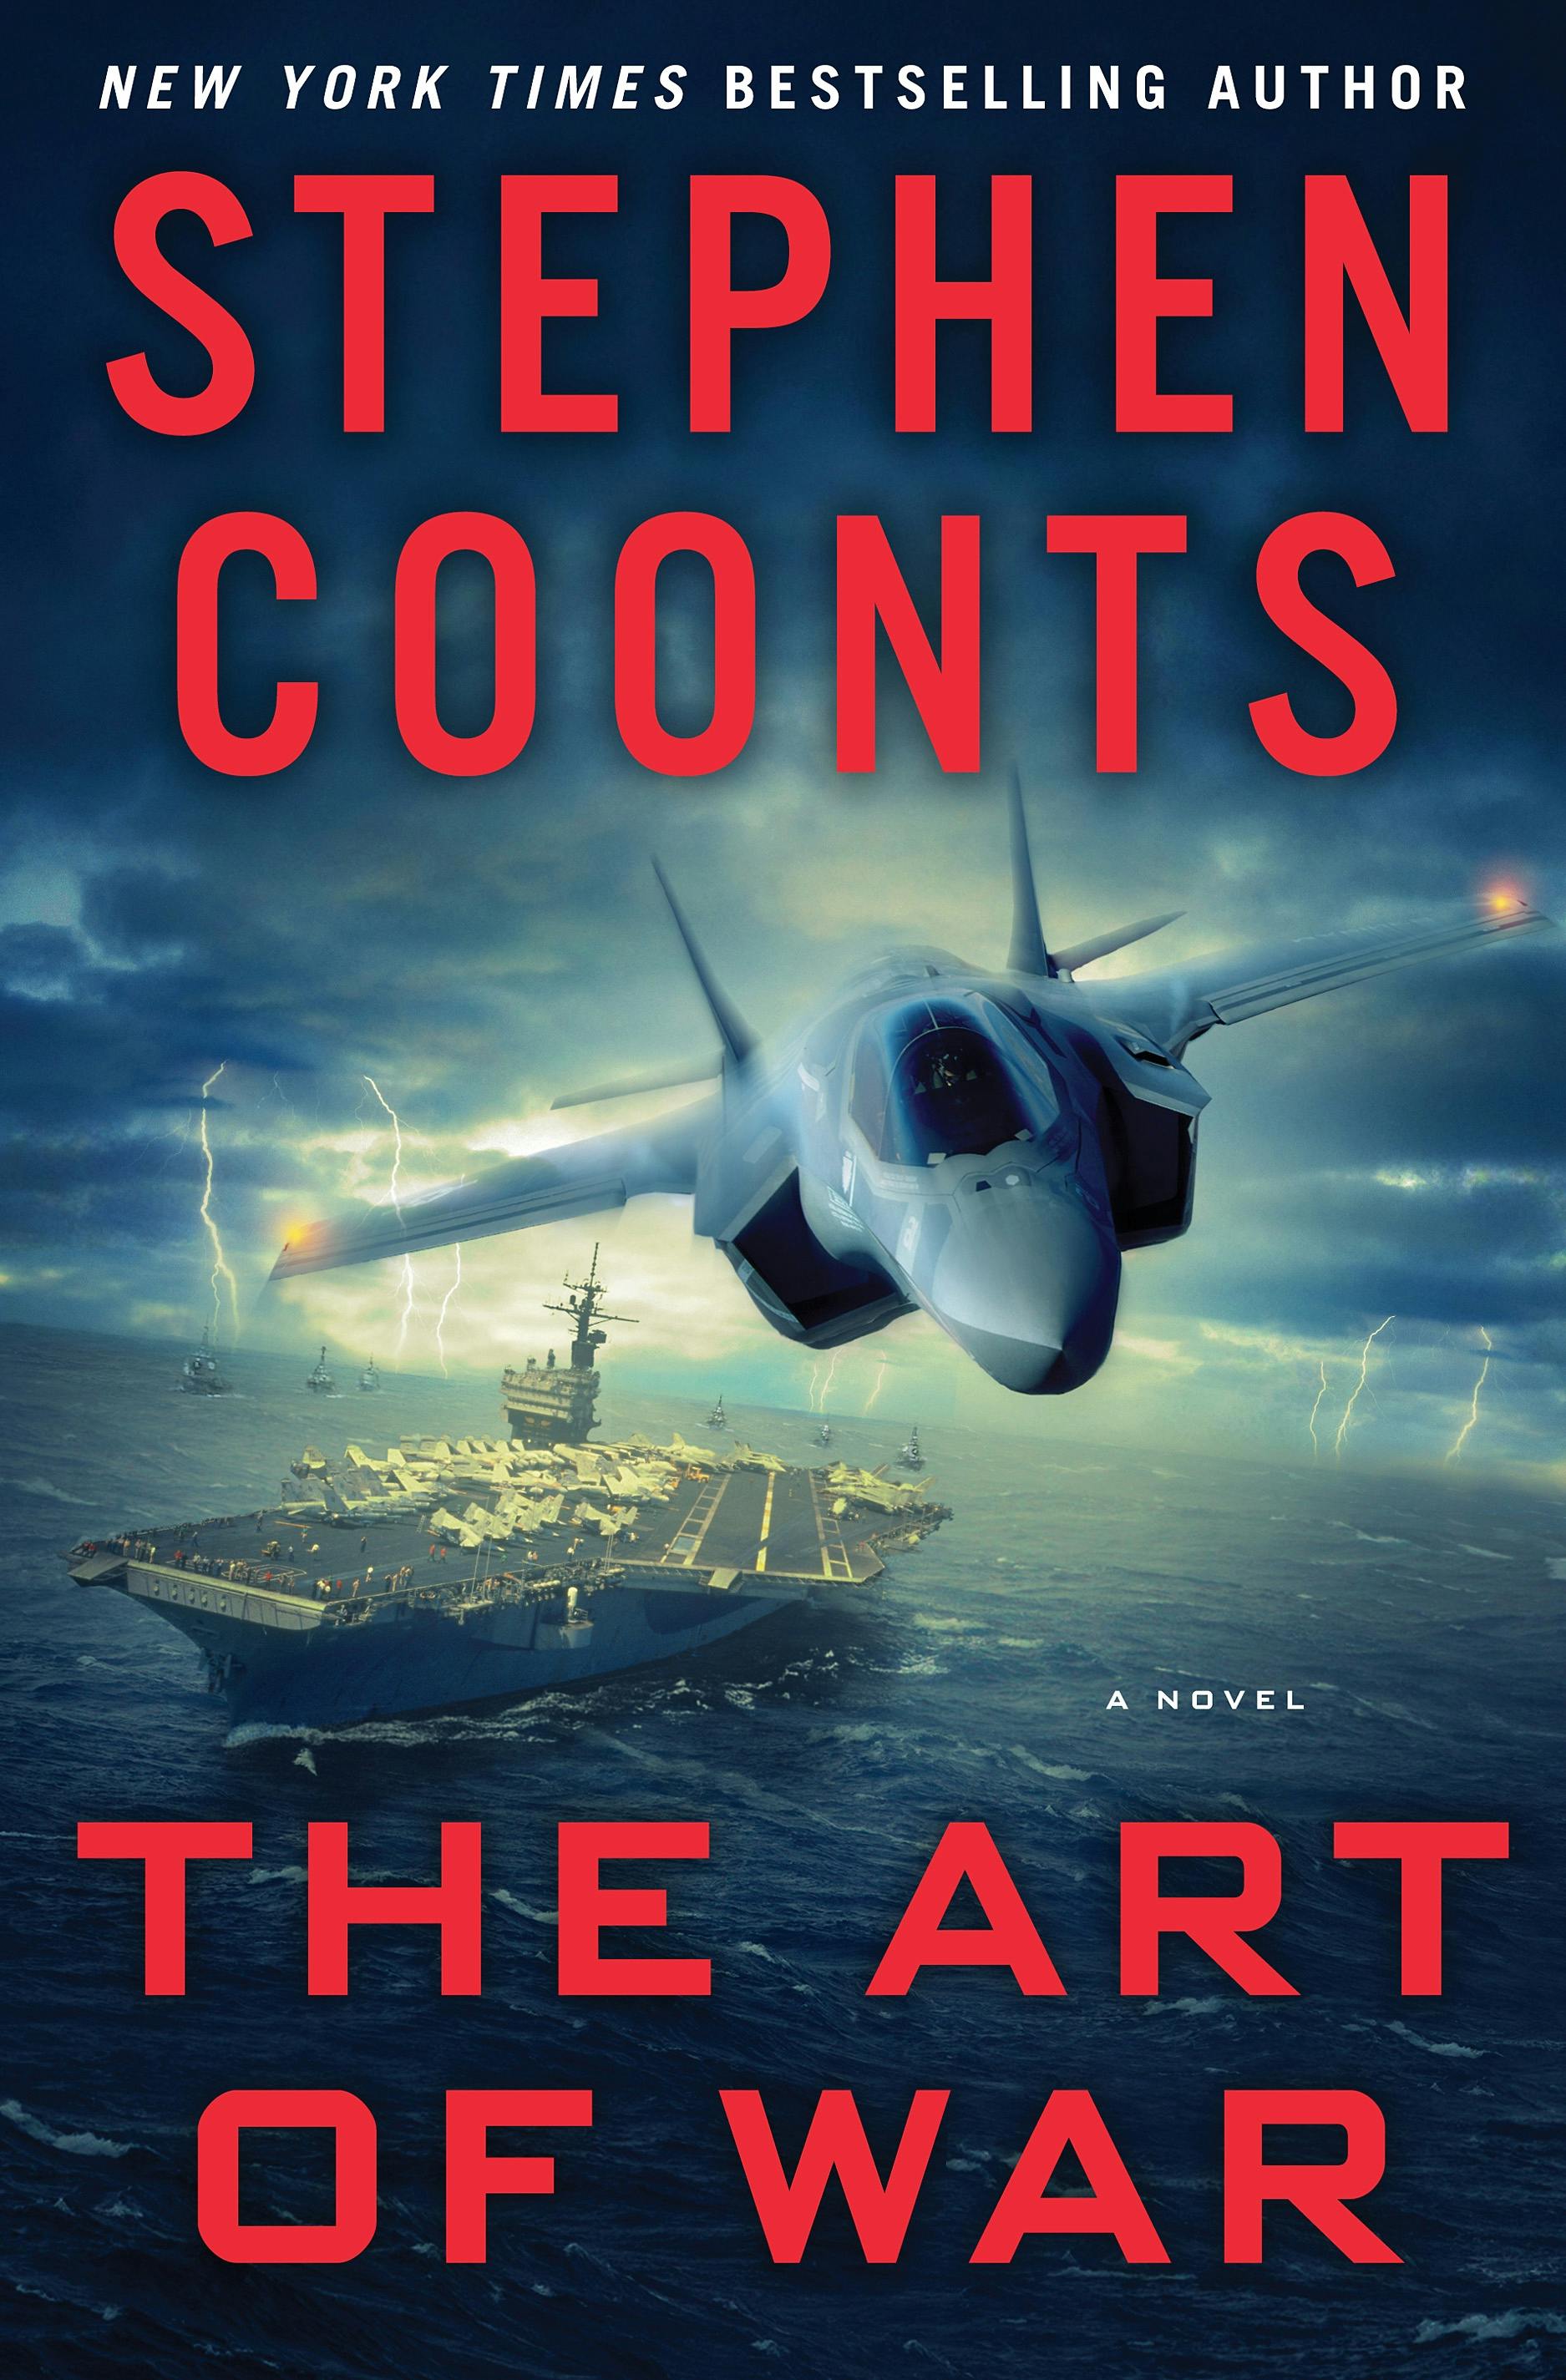 The Intruders, Book by Stephen Coonts